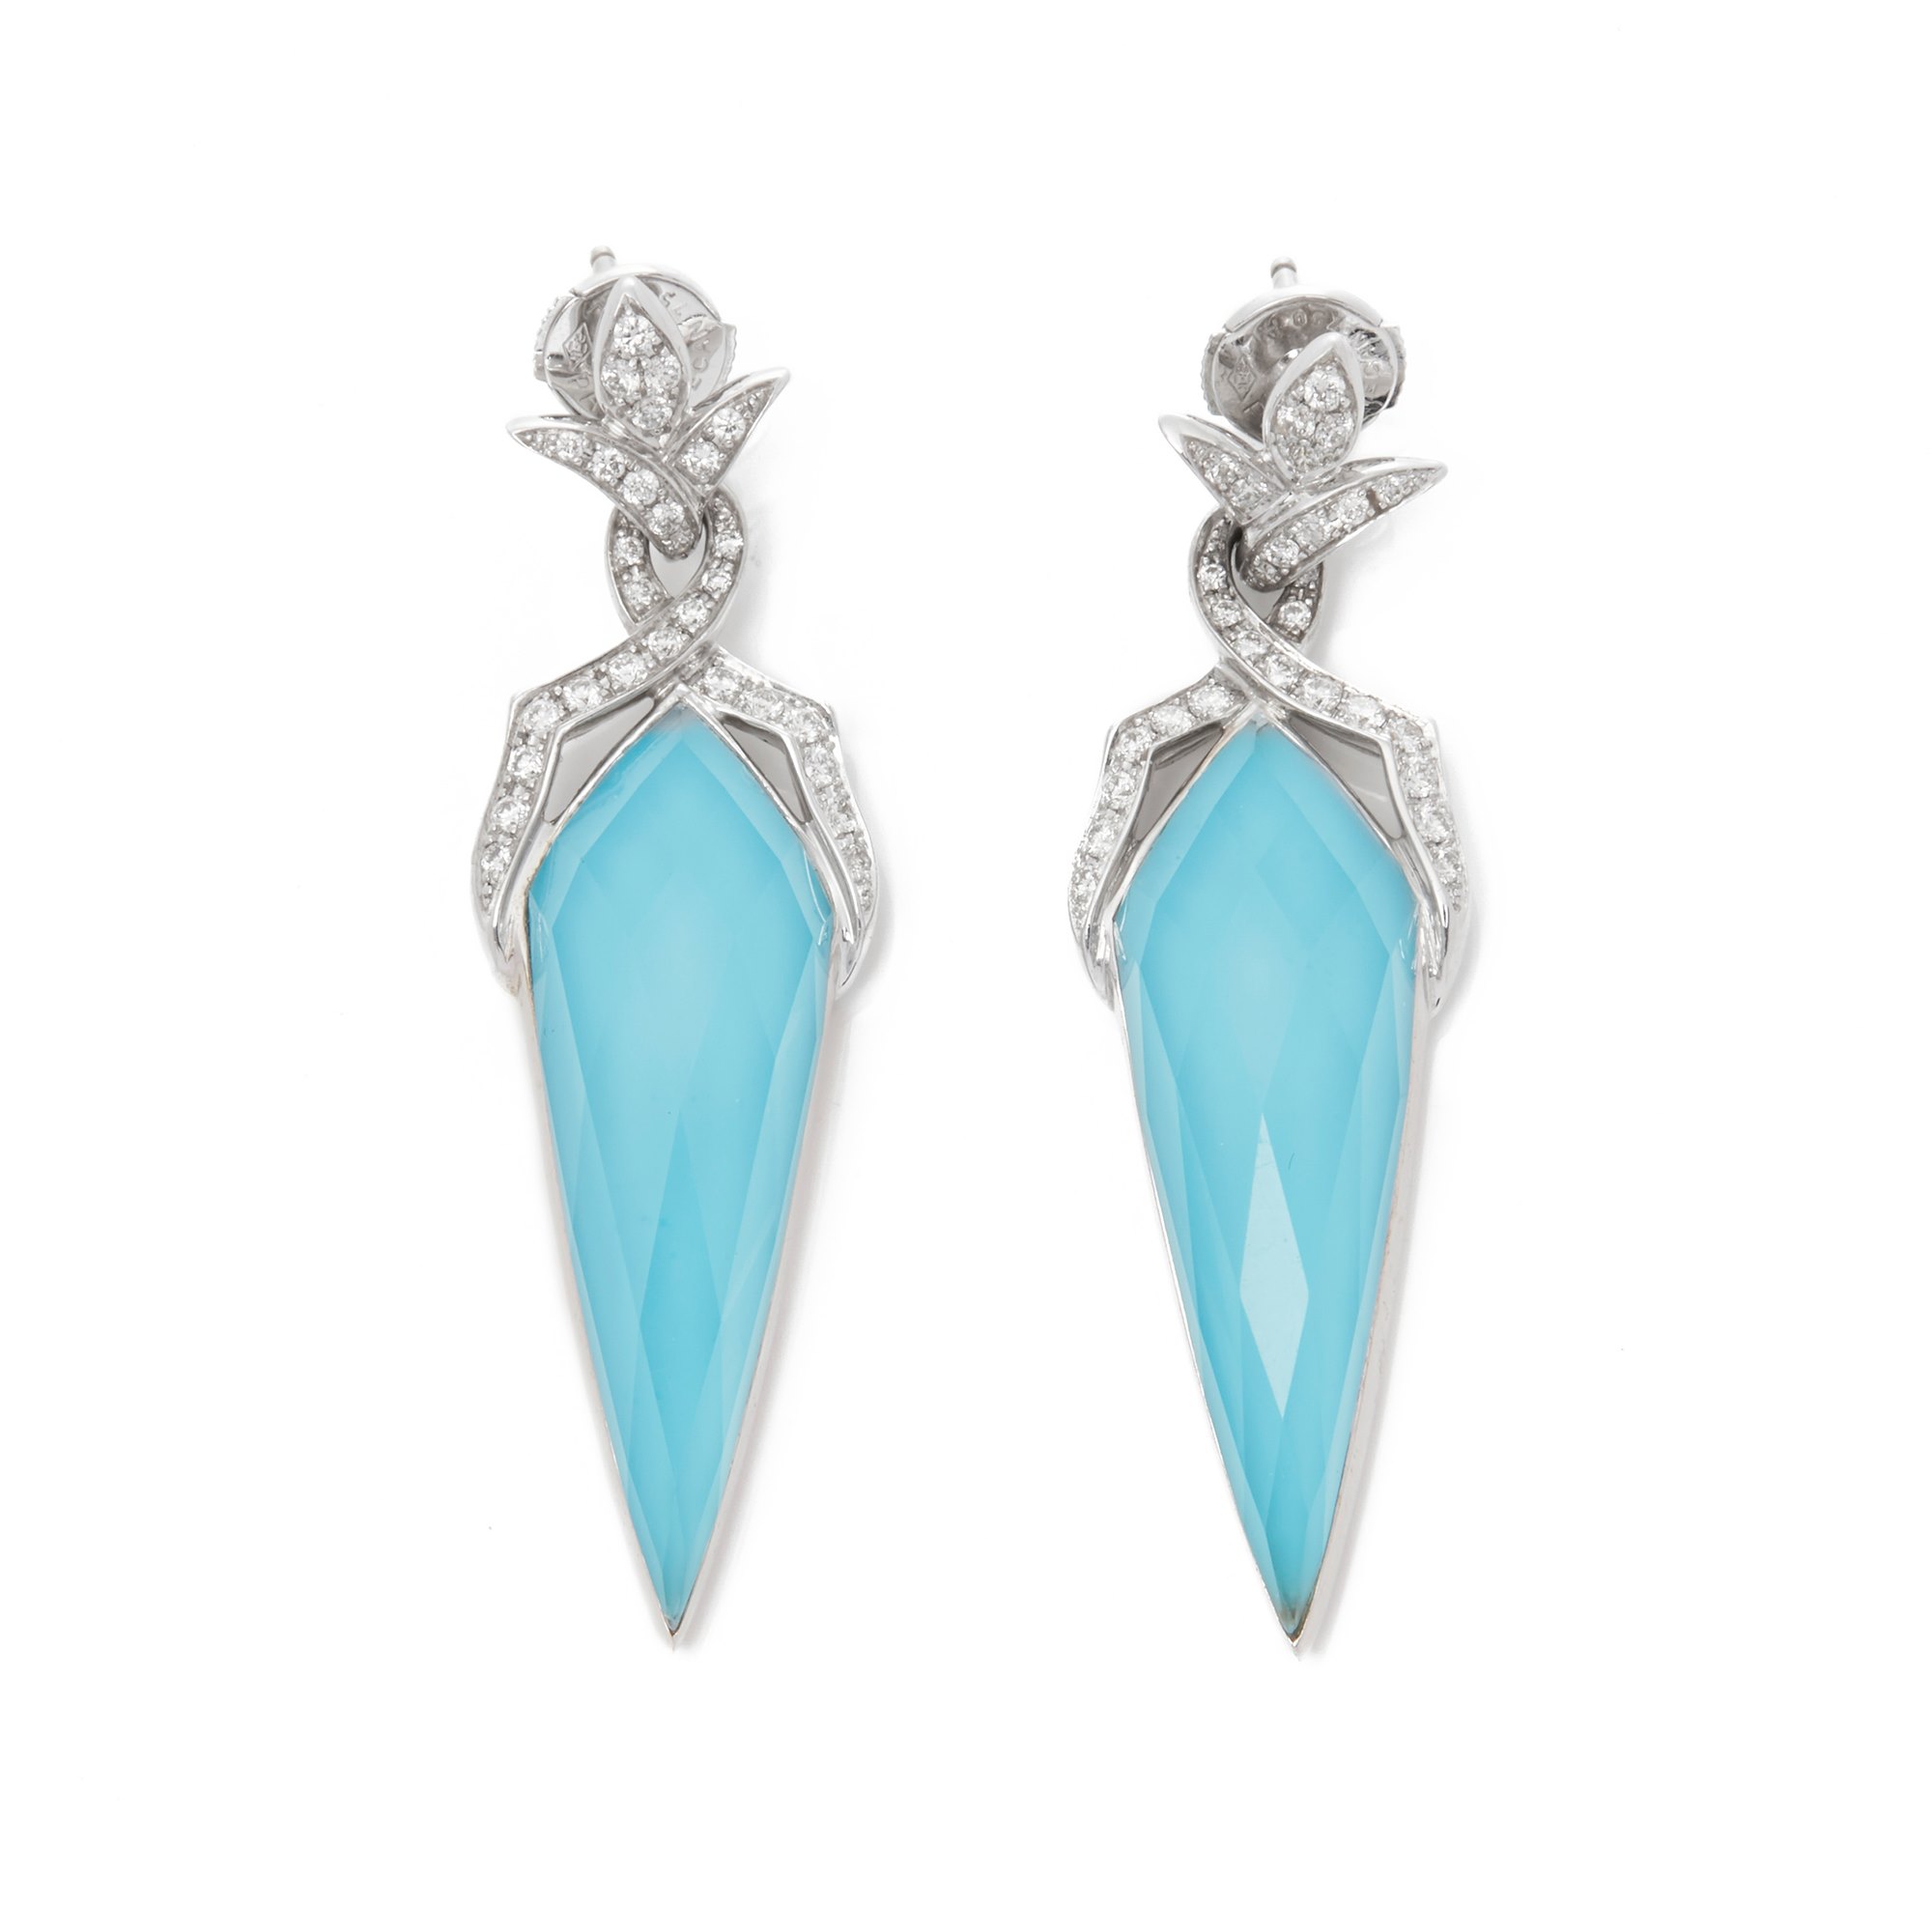 Stephen Webster Crystal Haze 18ct White Gold Turquoise Quartz and Diamond Earrings